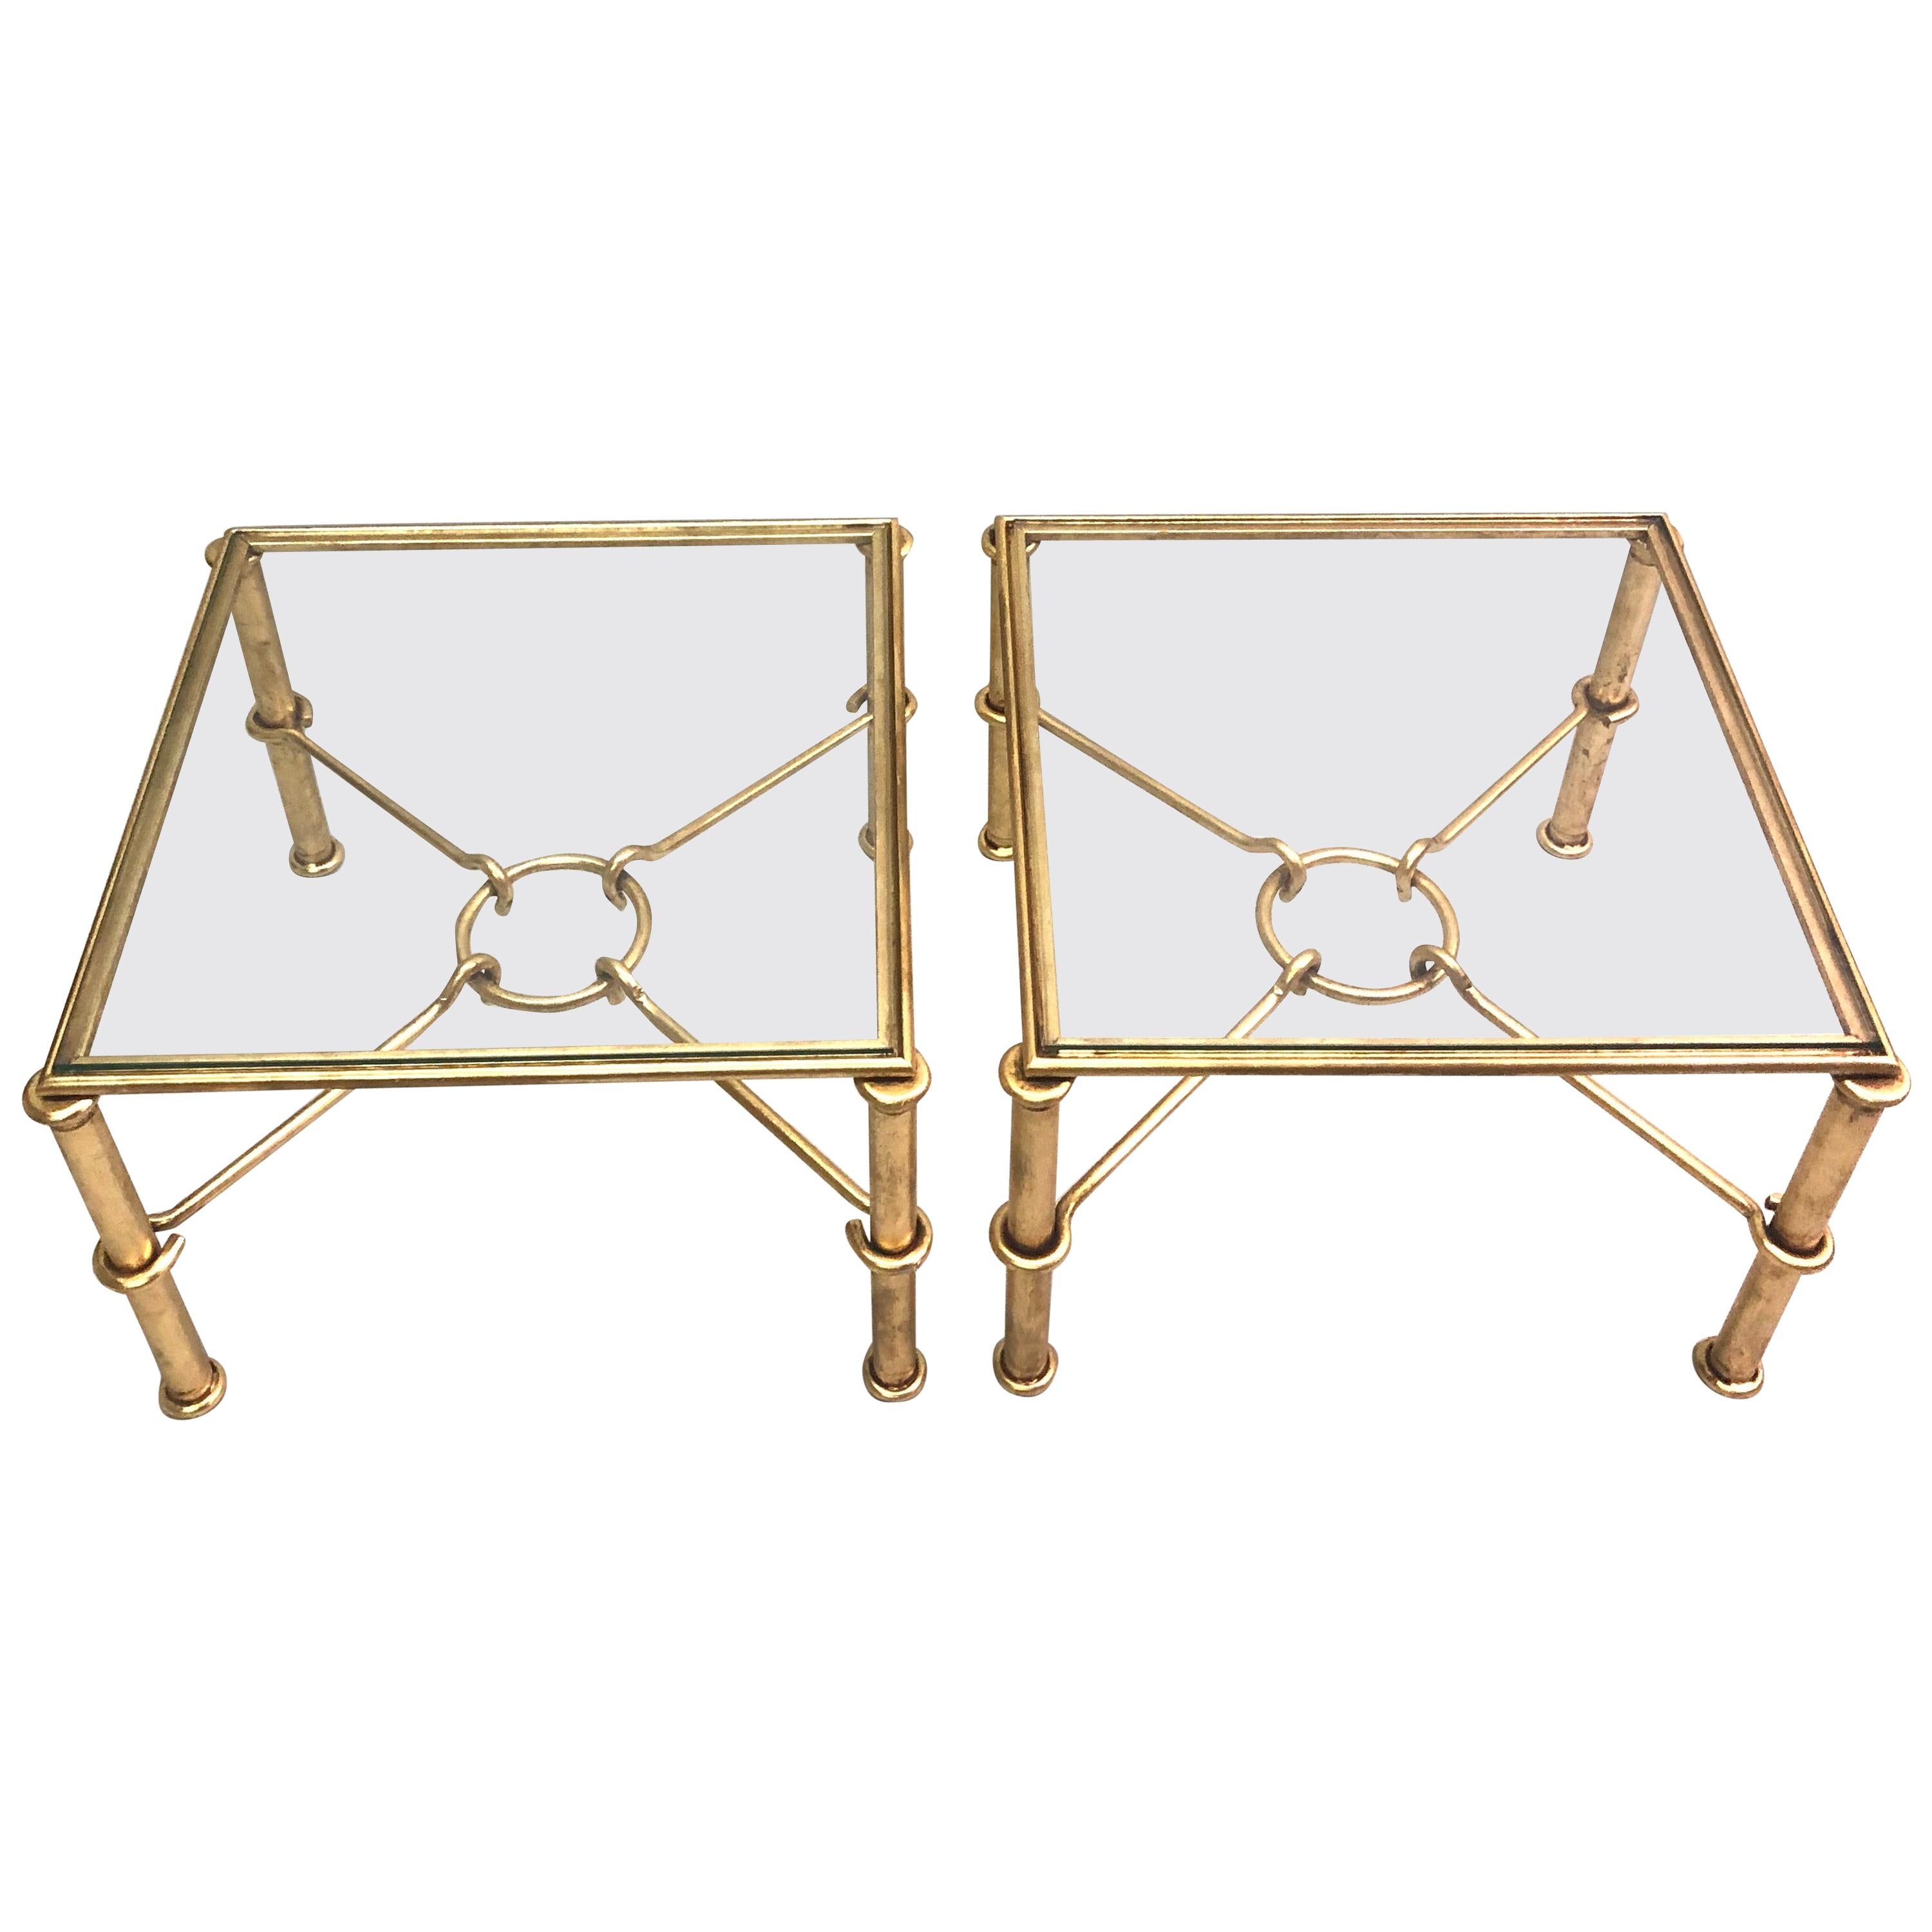 Pair of Modern Neoclassical Gilt Iron Side Tables or Coffee Table for Hermes